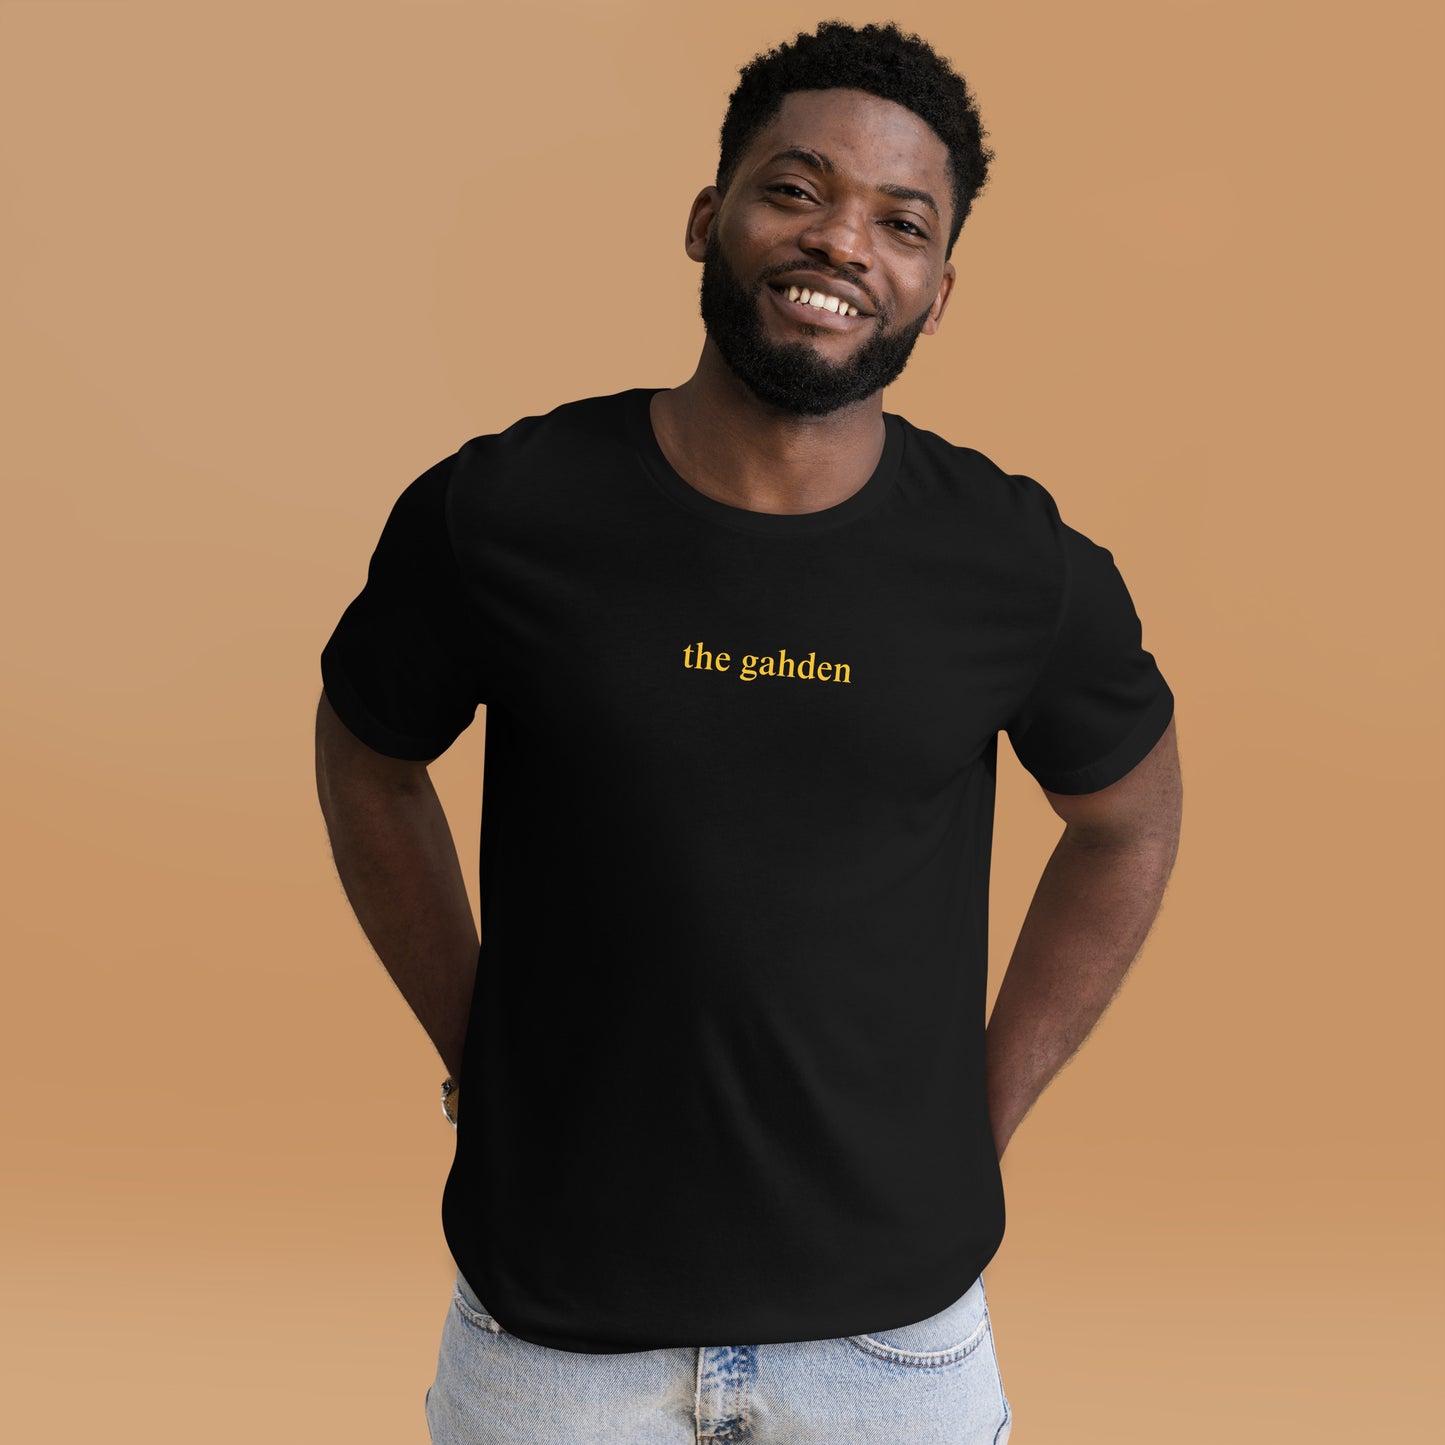 man wearing. black tshirt that says "the gahden" in gold lettering